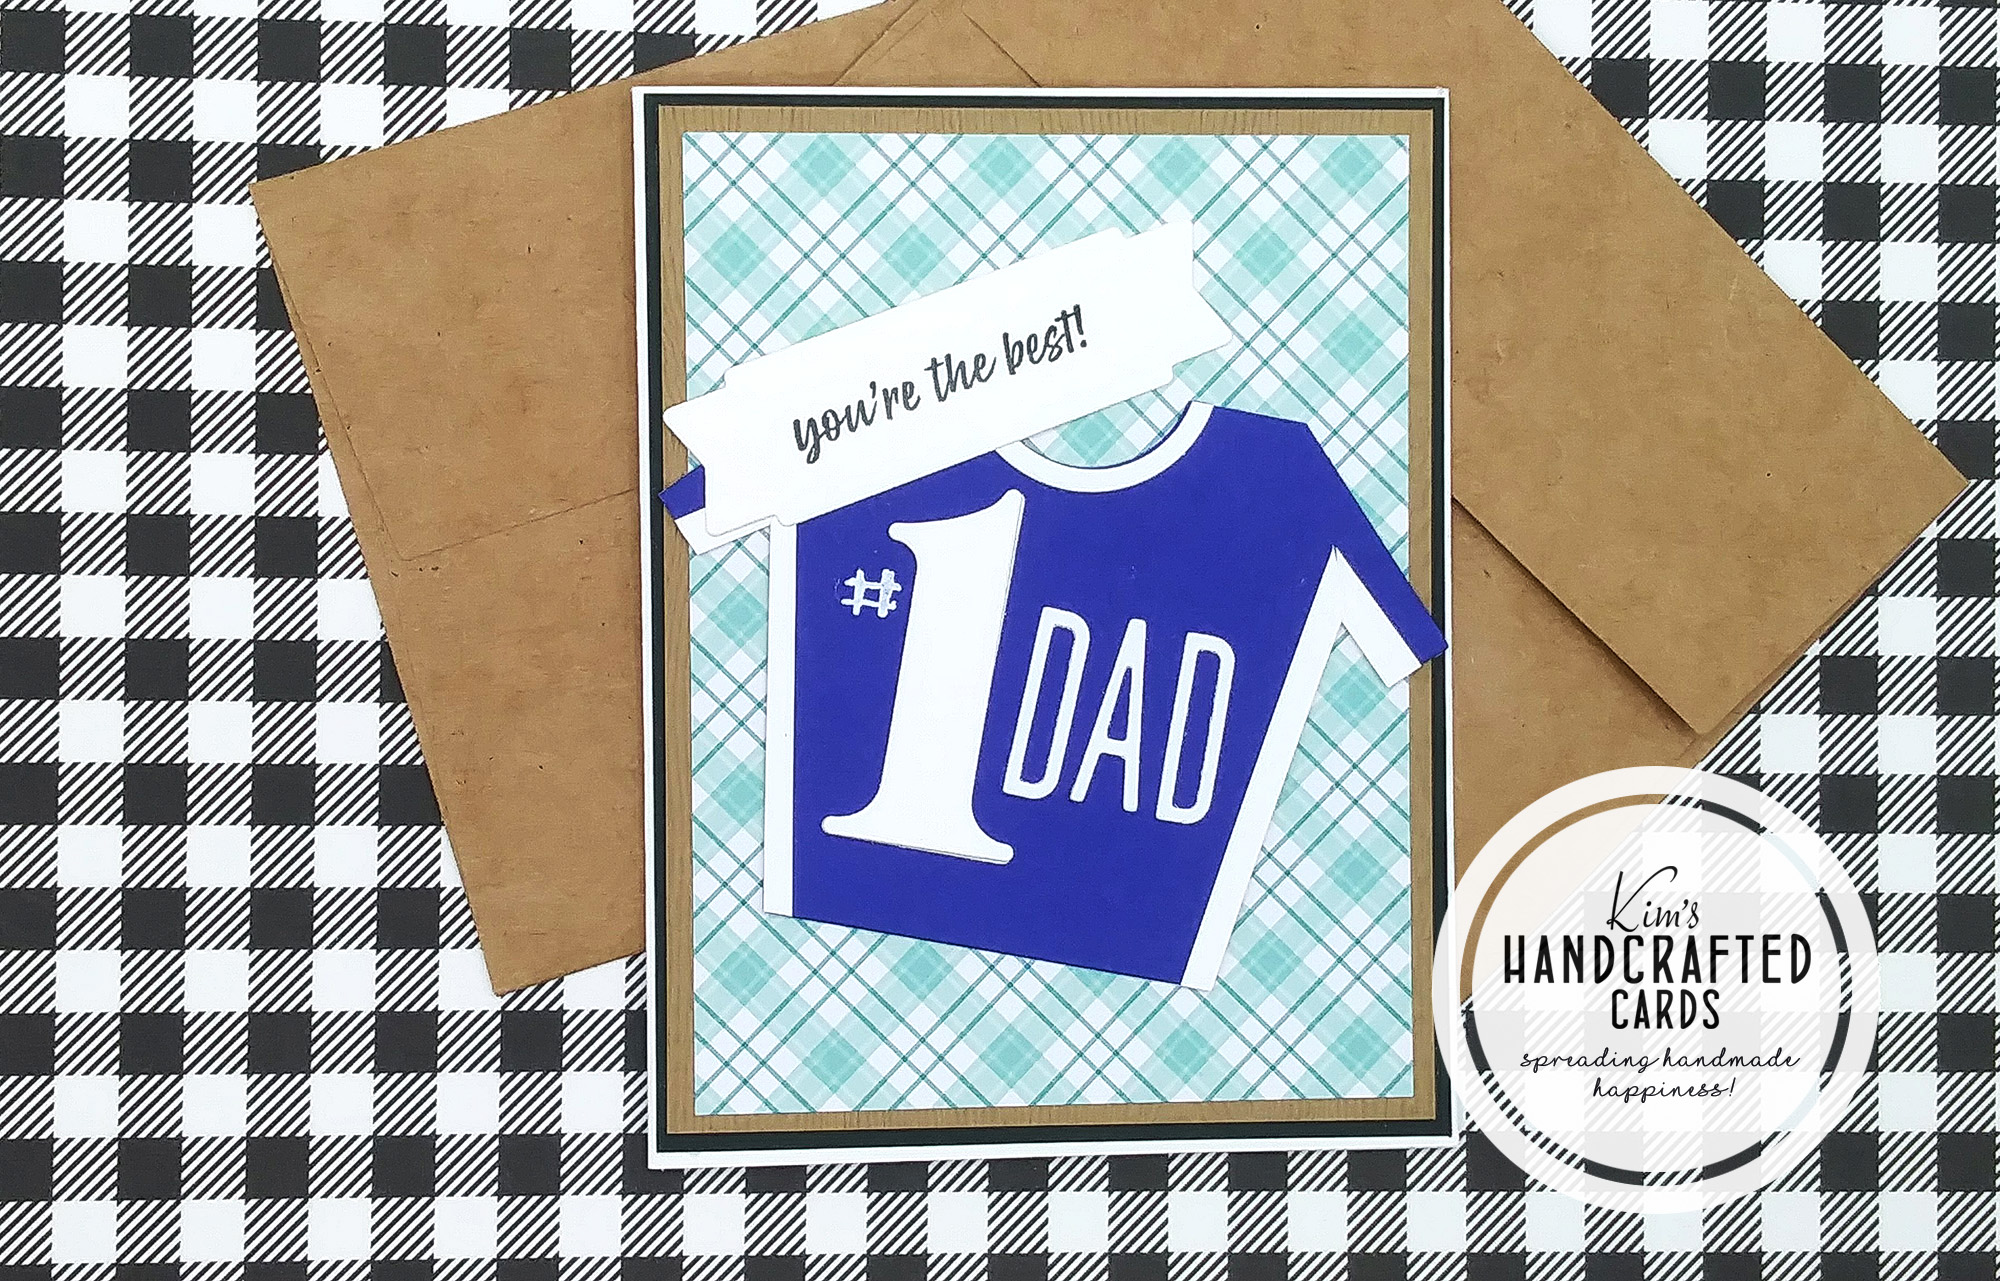 A Creative Accident turned into a Wonder Father's Day Card